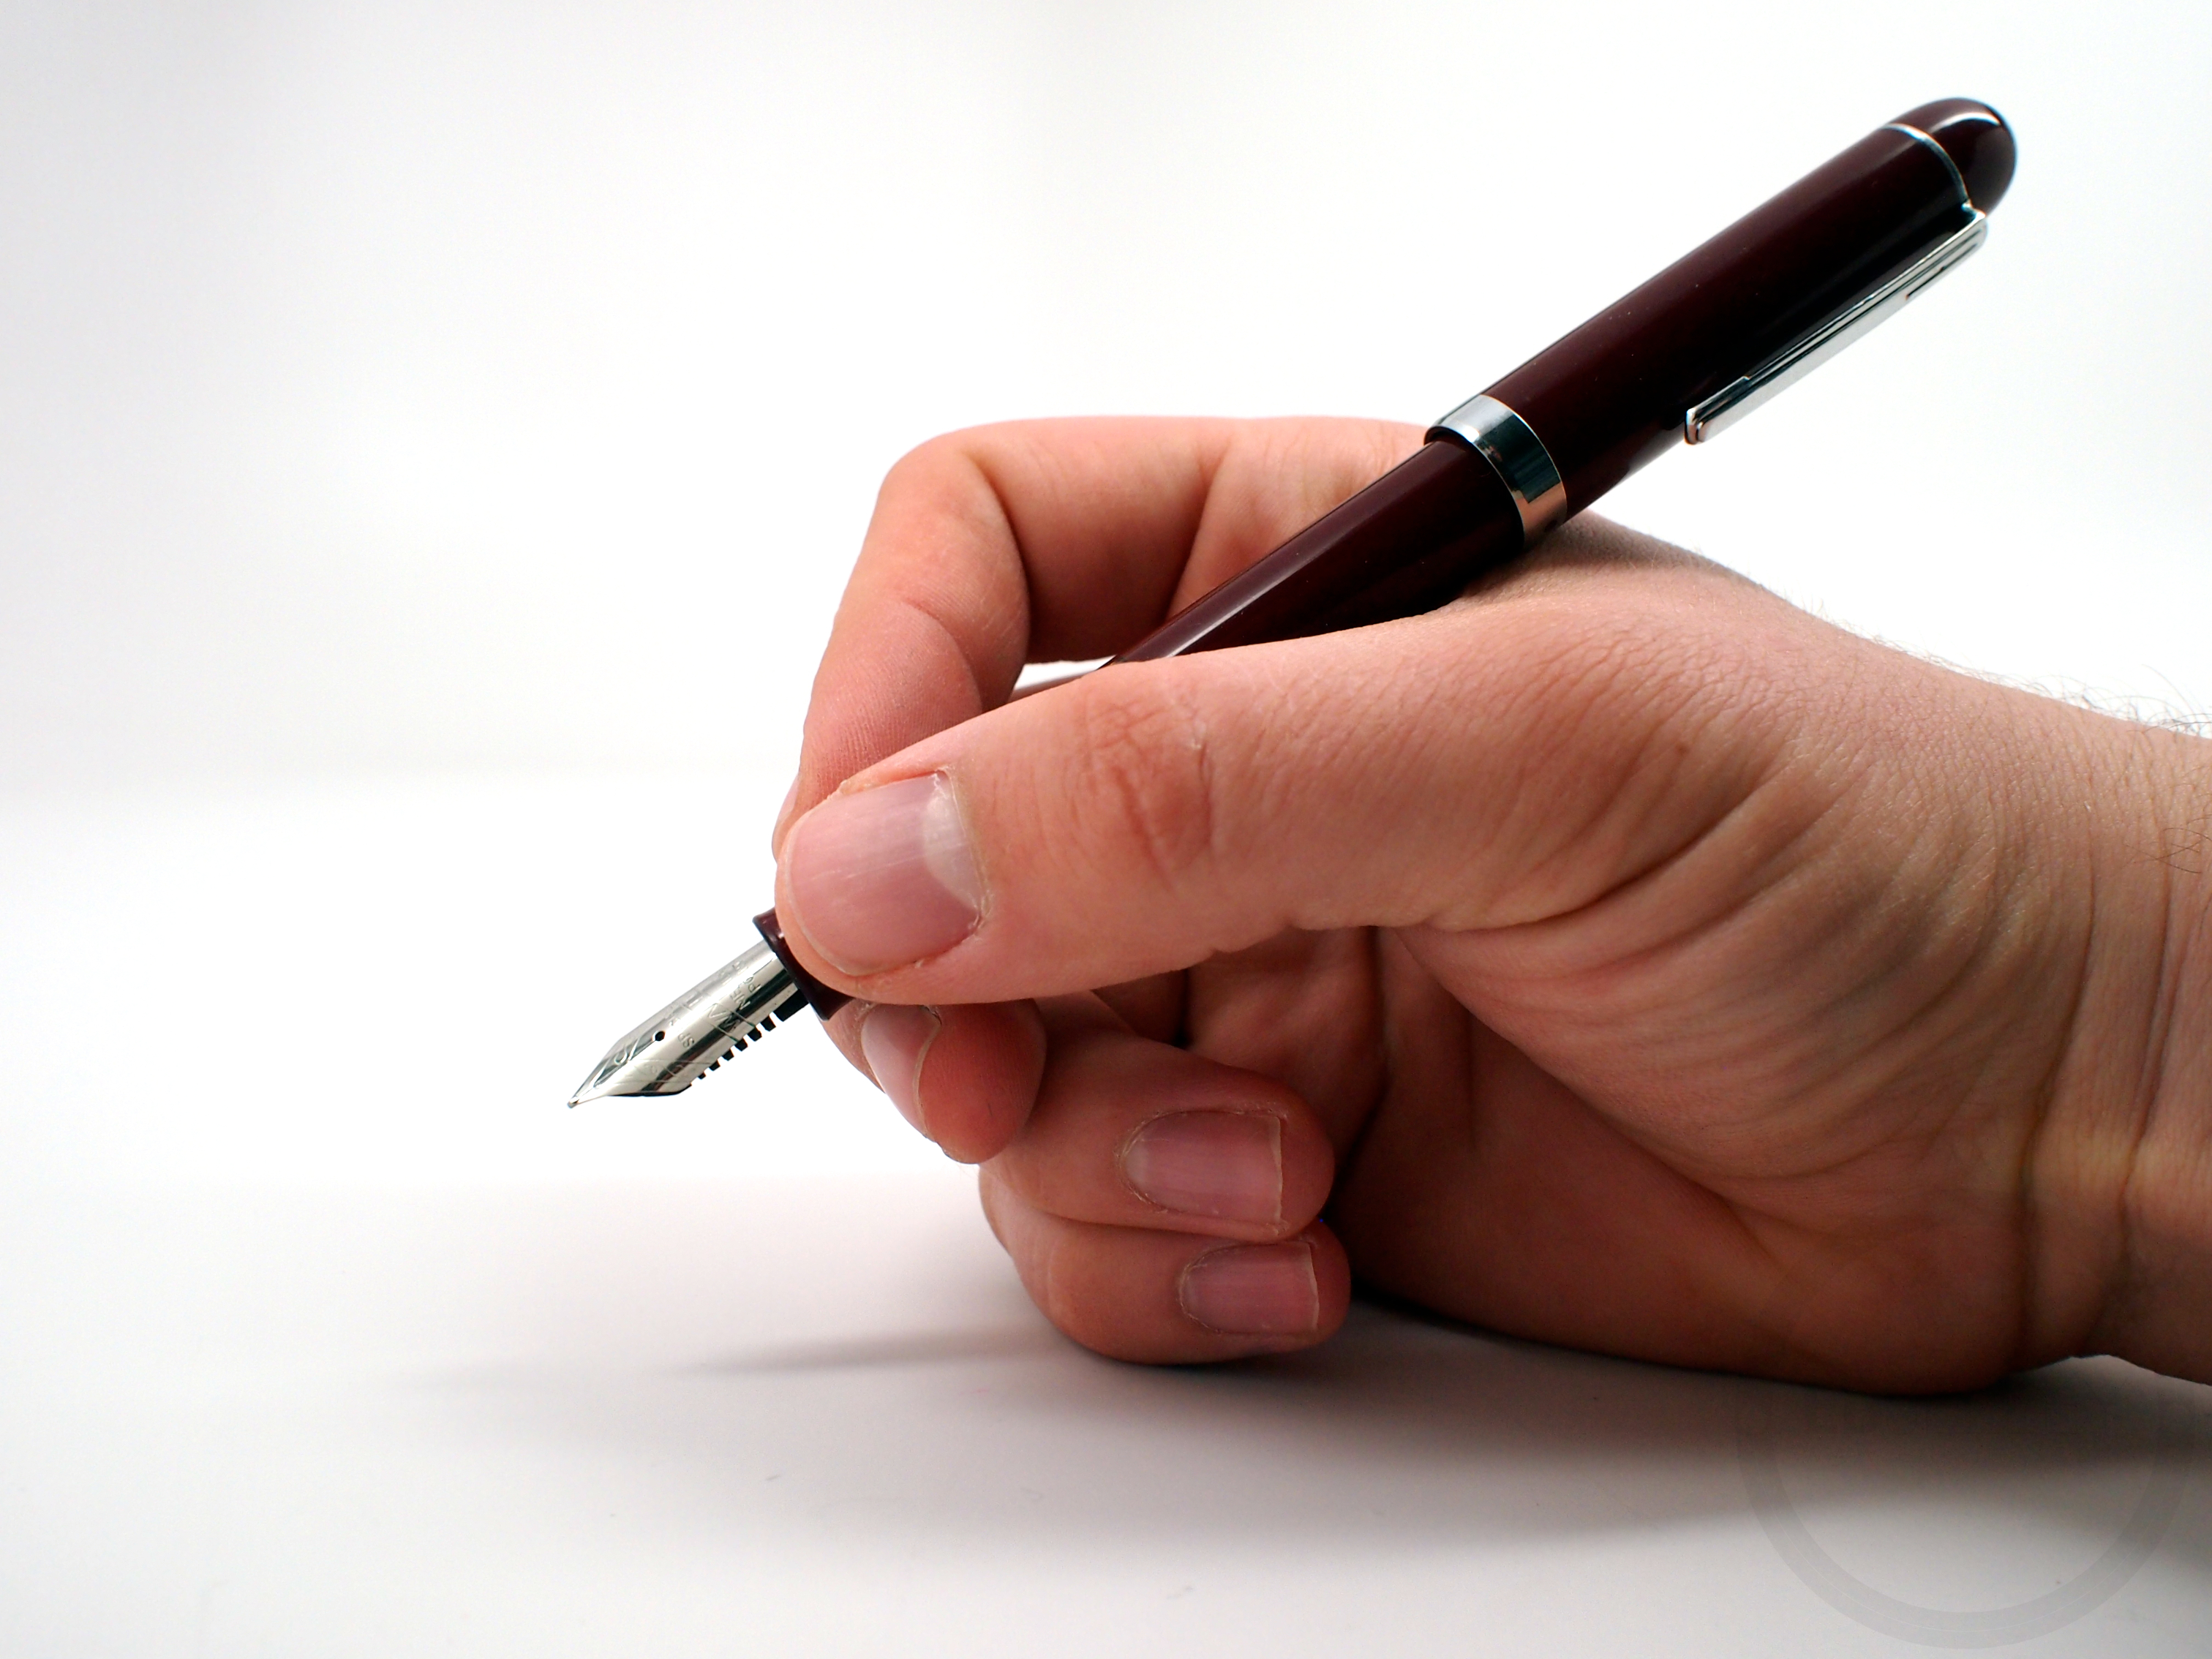 Written with a pen. Hand with Pen. Writing Pen. Hand Ballpoint Pen. Hand with Pen writing.